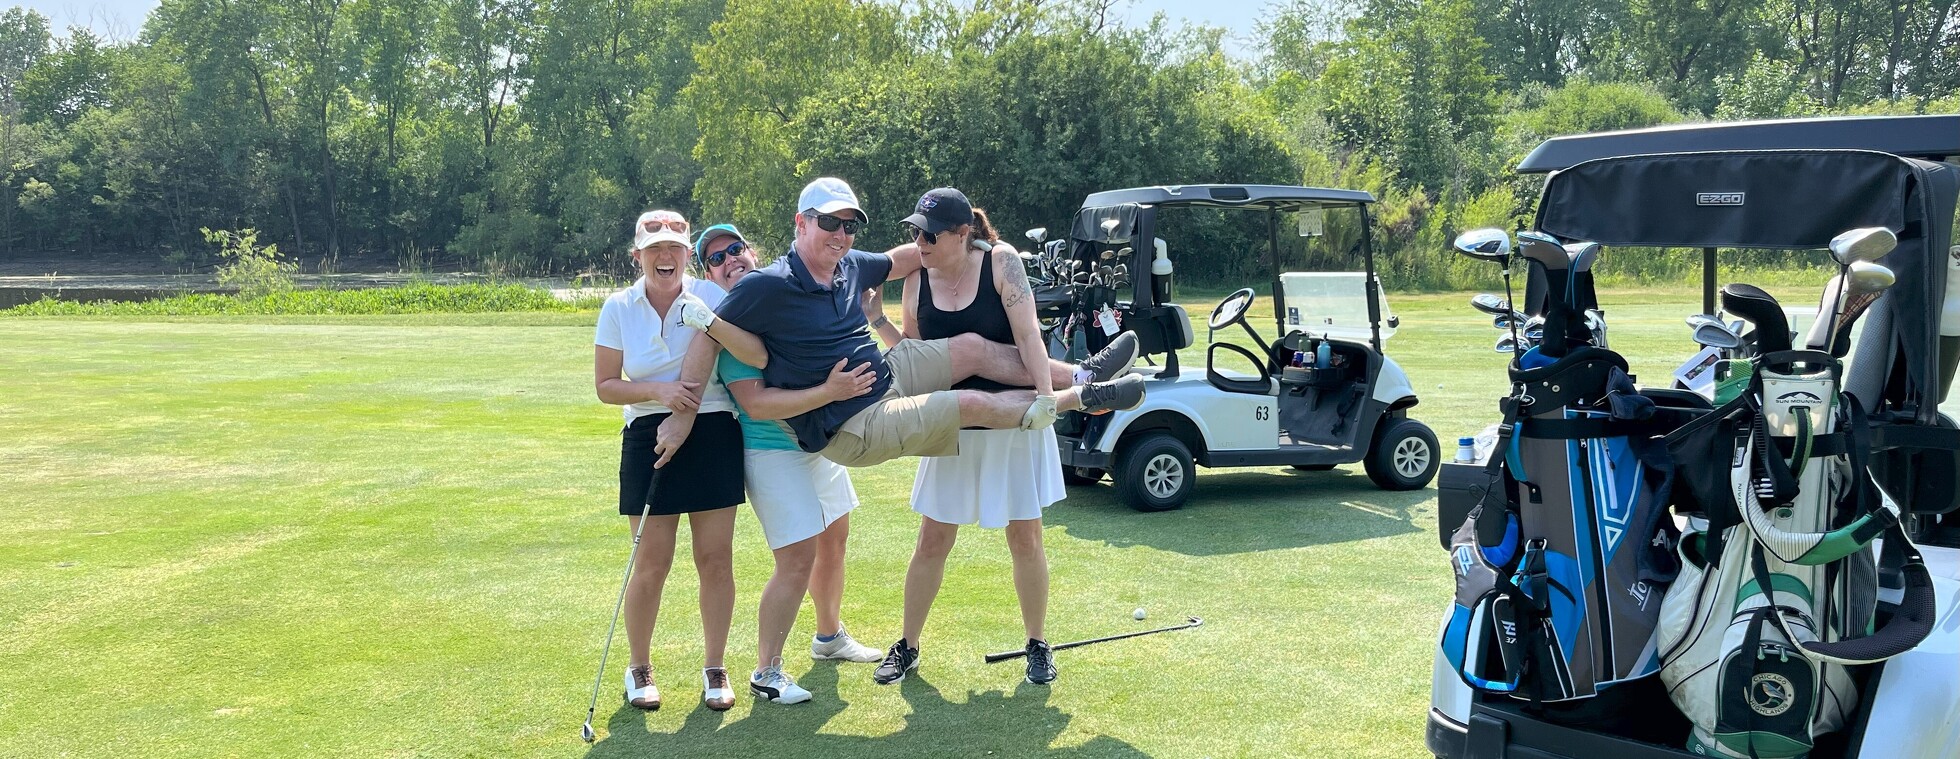 Friends Golf Outing